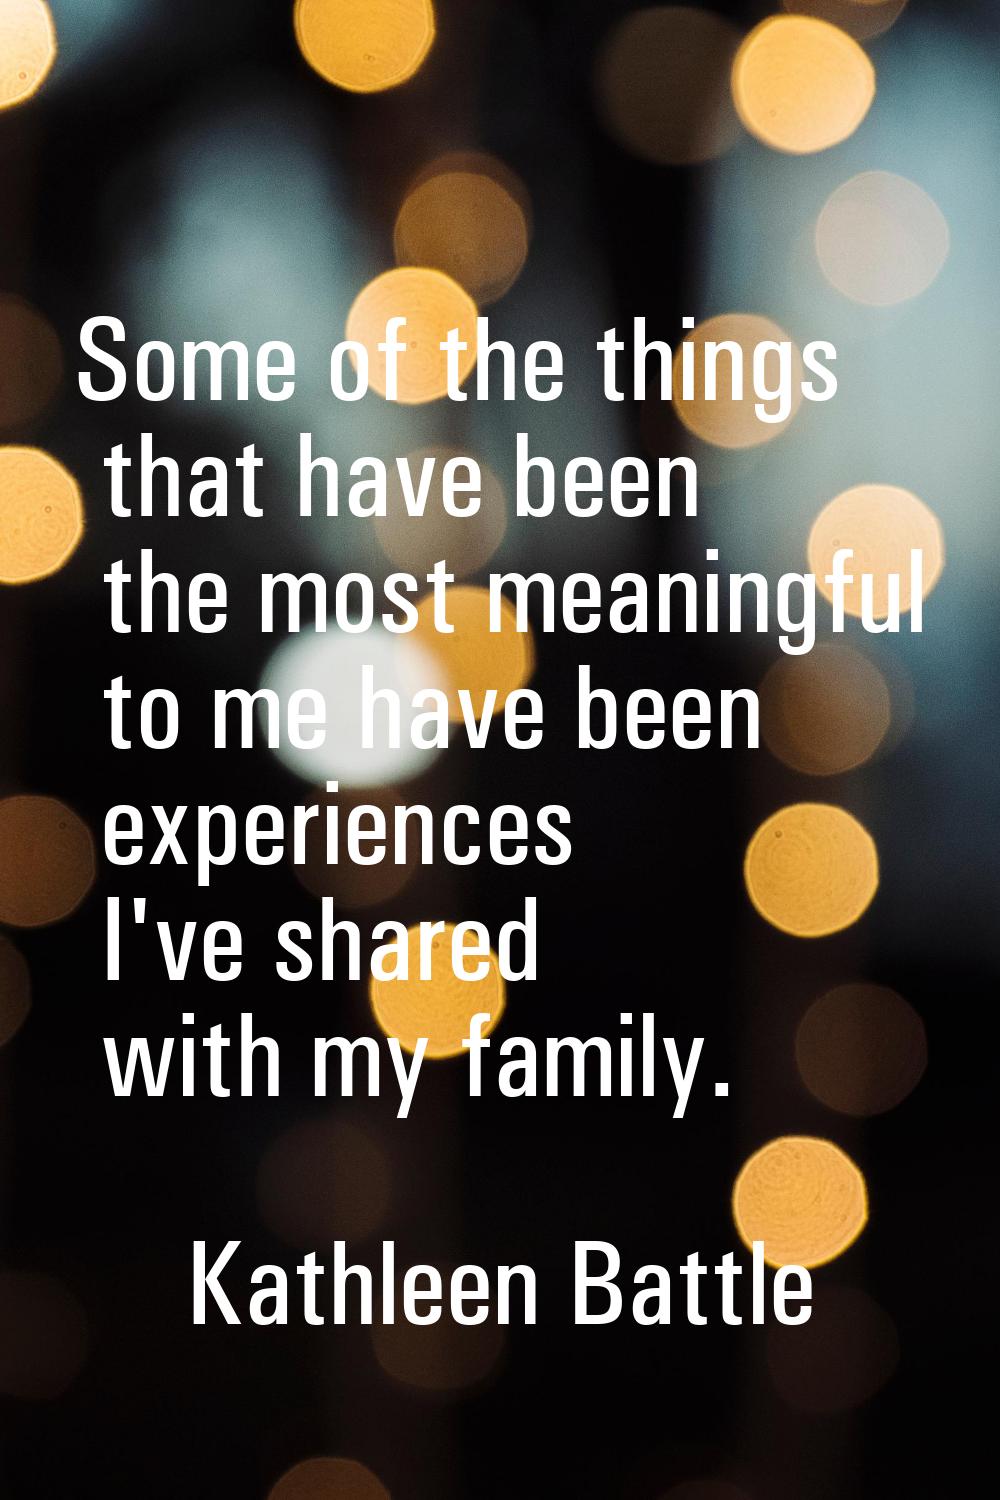 Some of the things that have been the most meaningful to me have been experiences I've shared with 